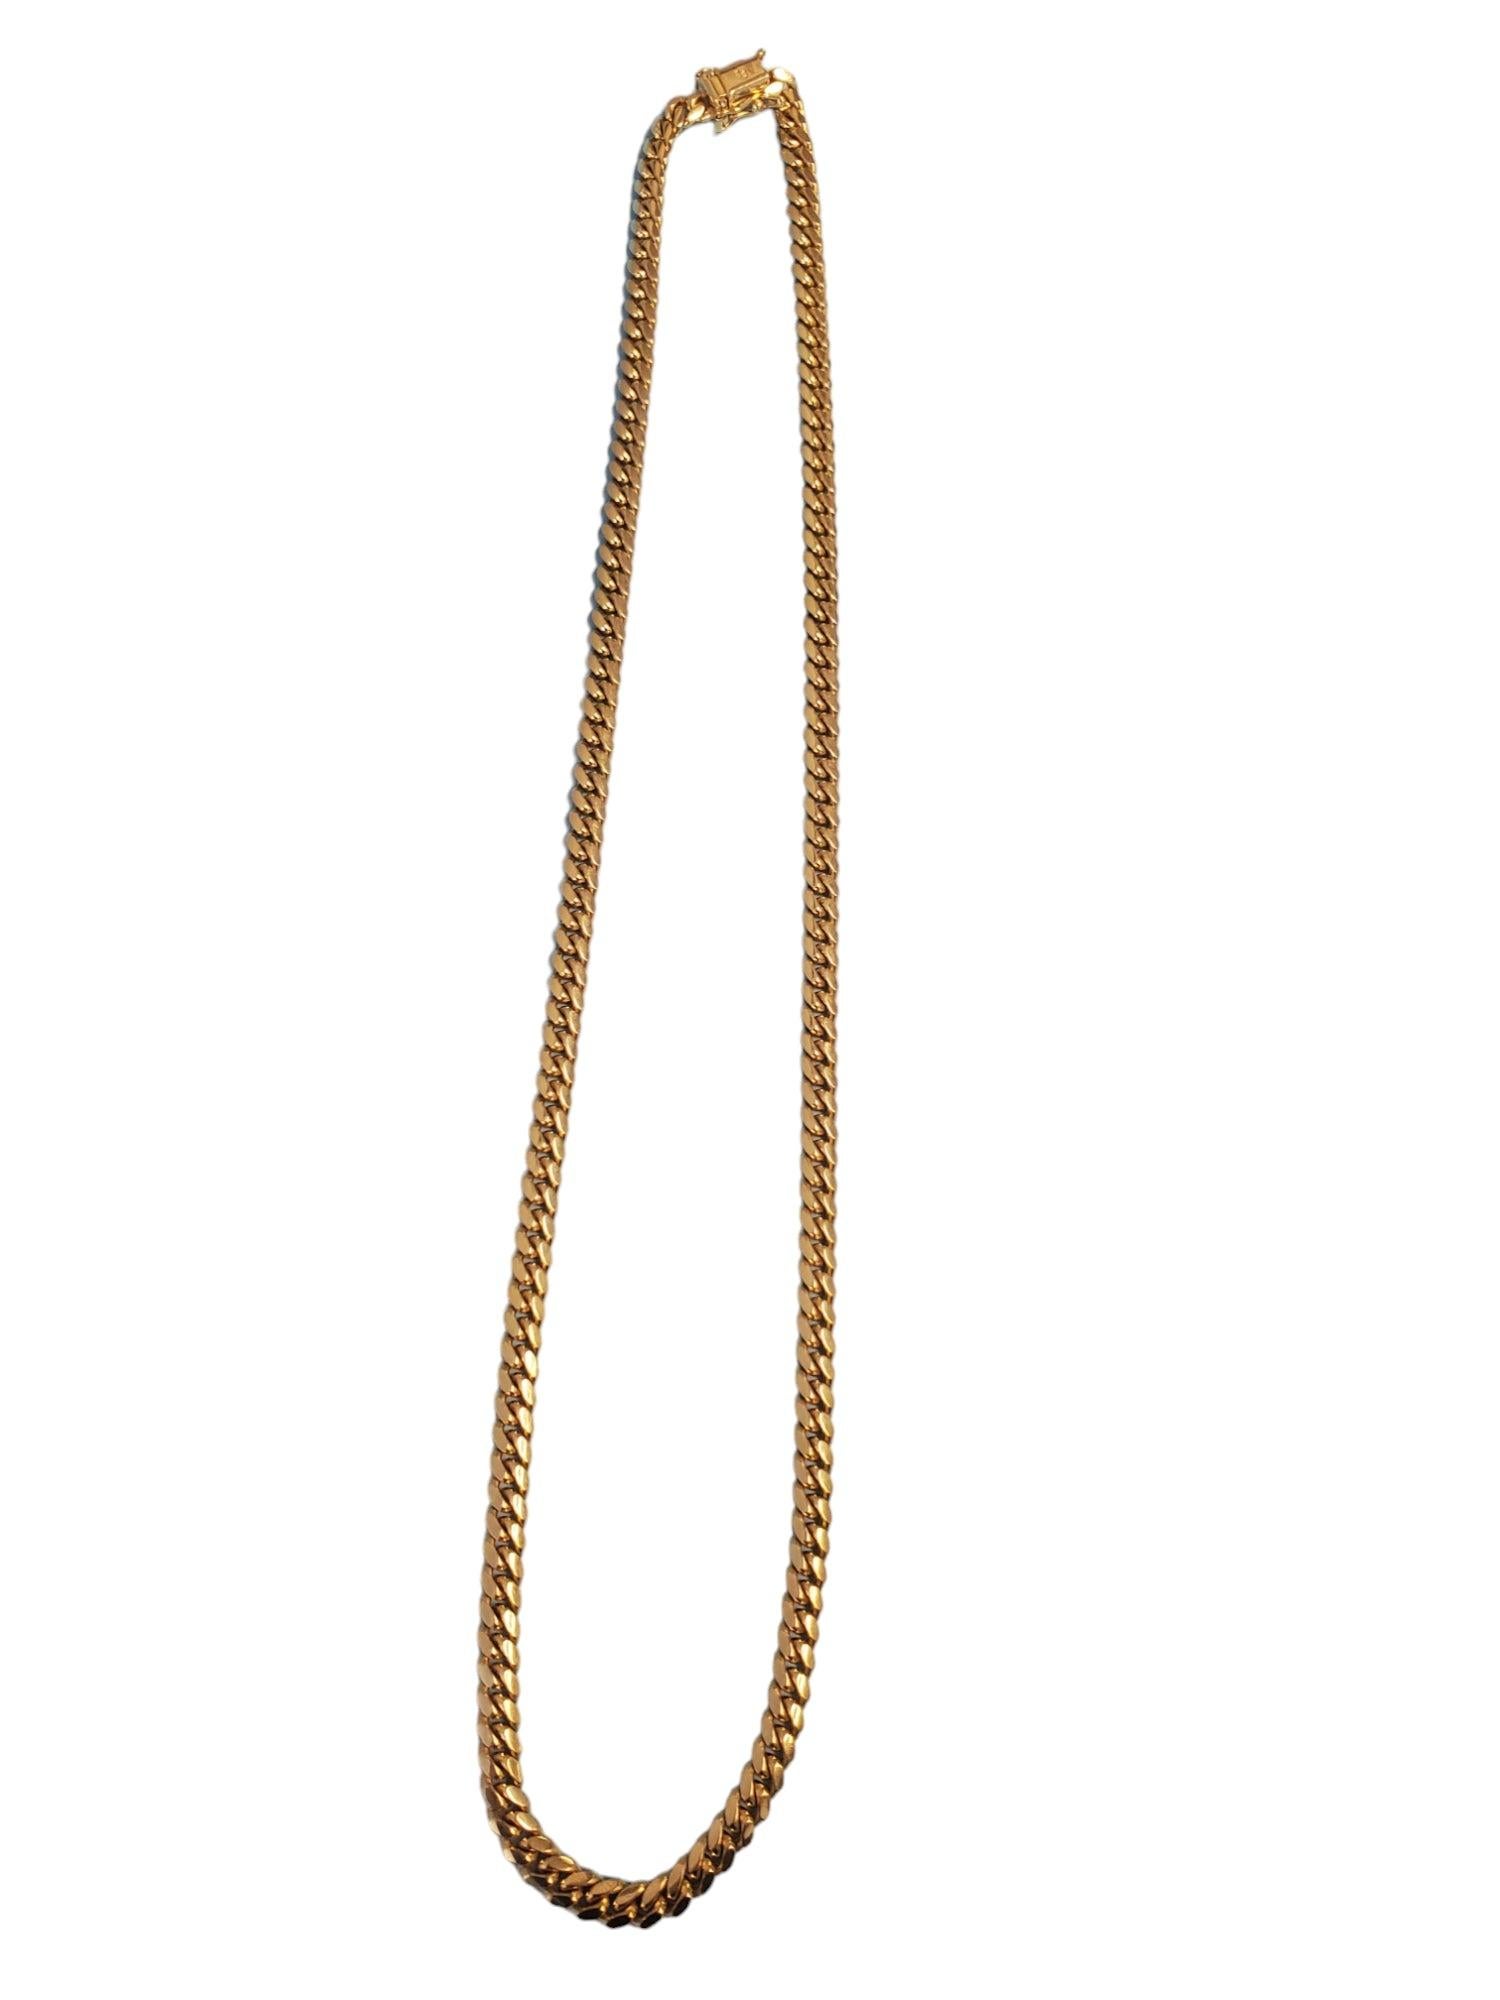 Estate Cuban Chain Necklace 10k Yellow Gold 20